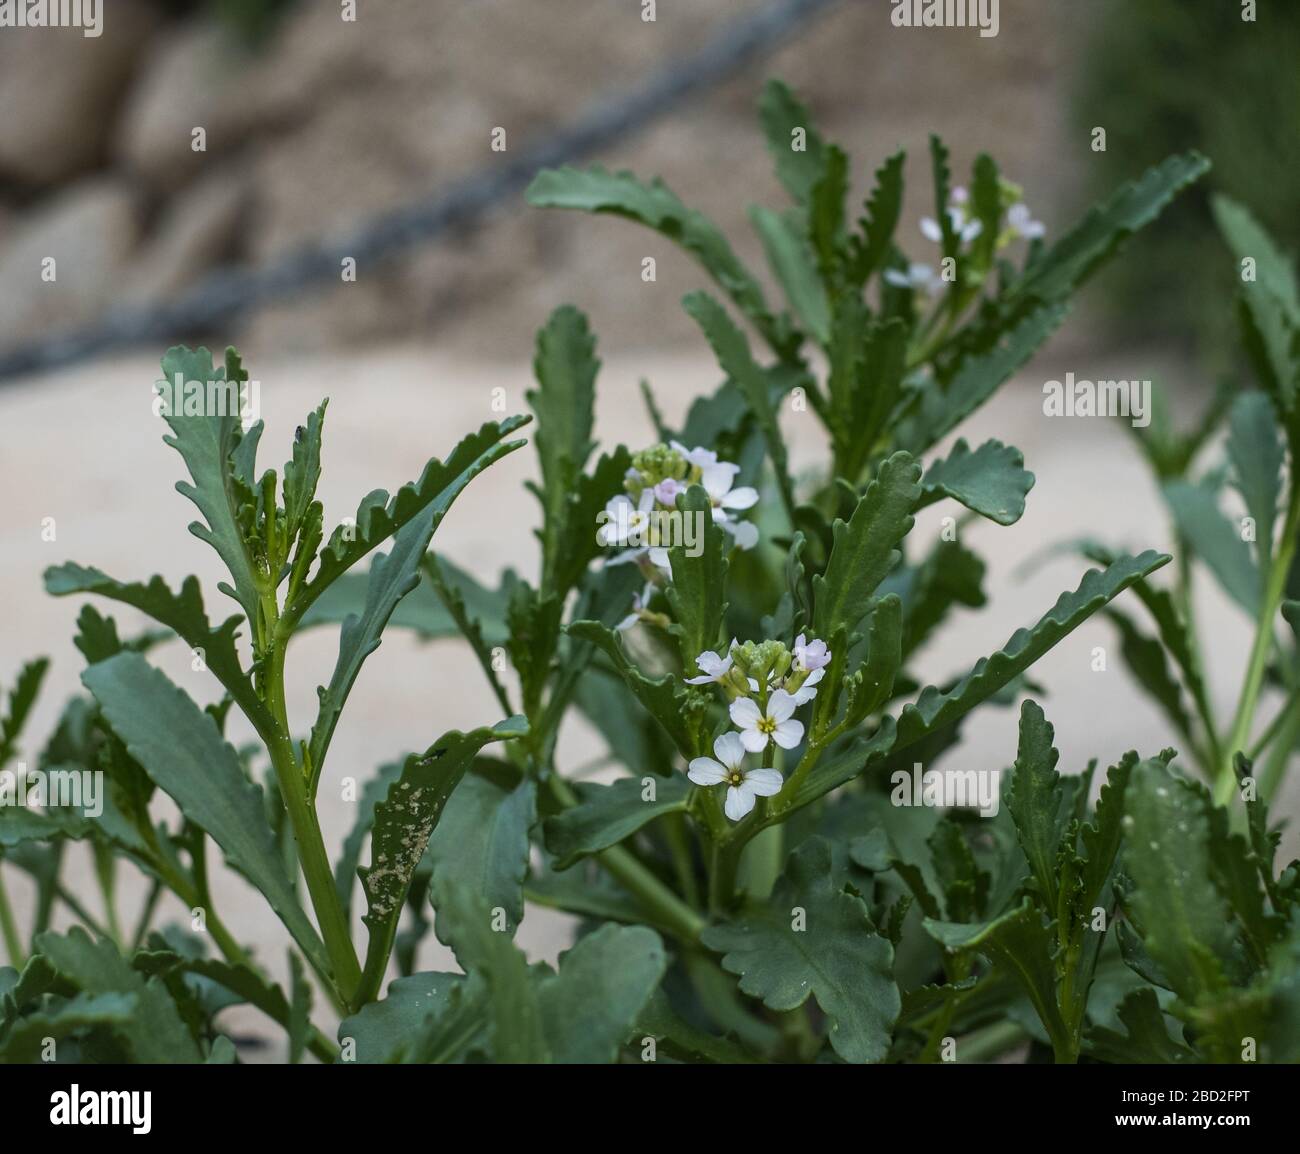 Sea rocket growing on the beach on St Agnes, Isles of Scilly Stock Photo